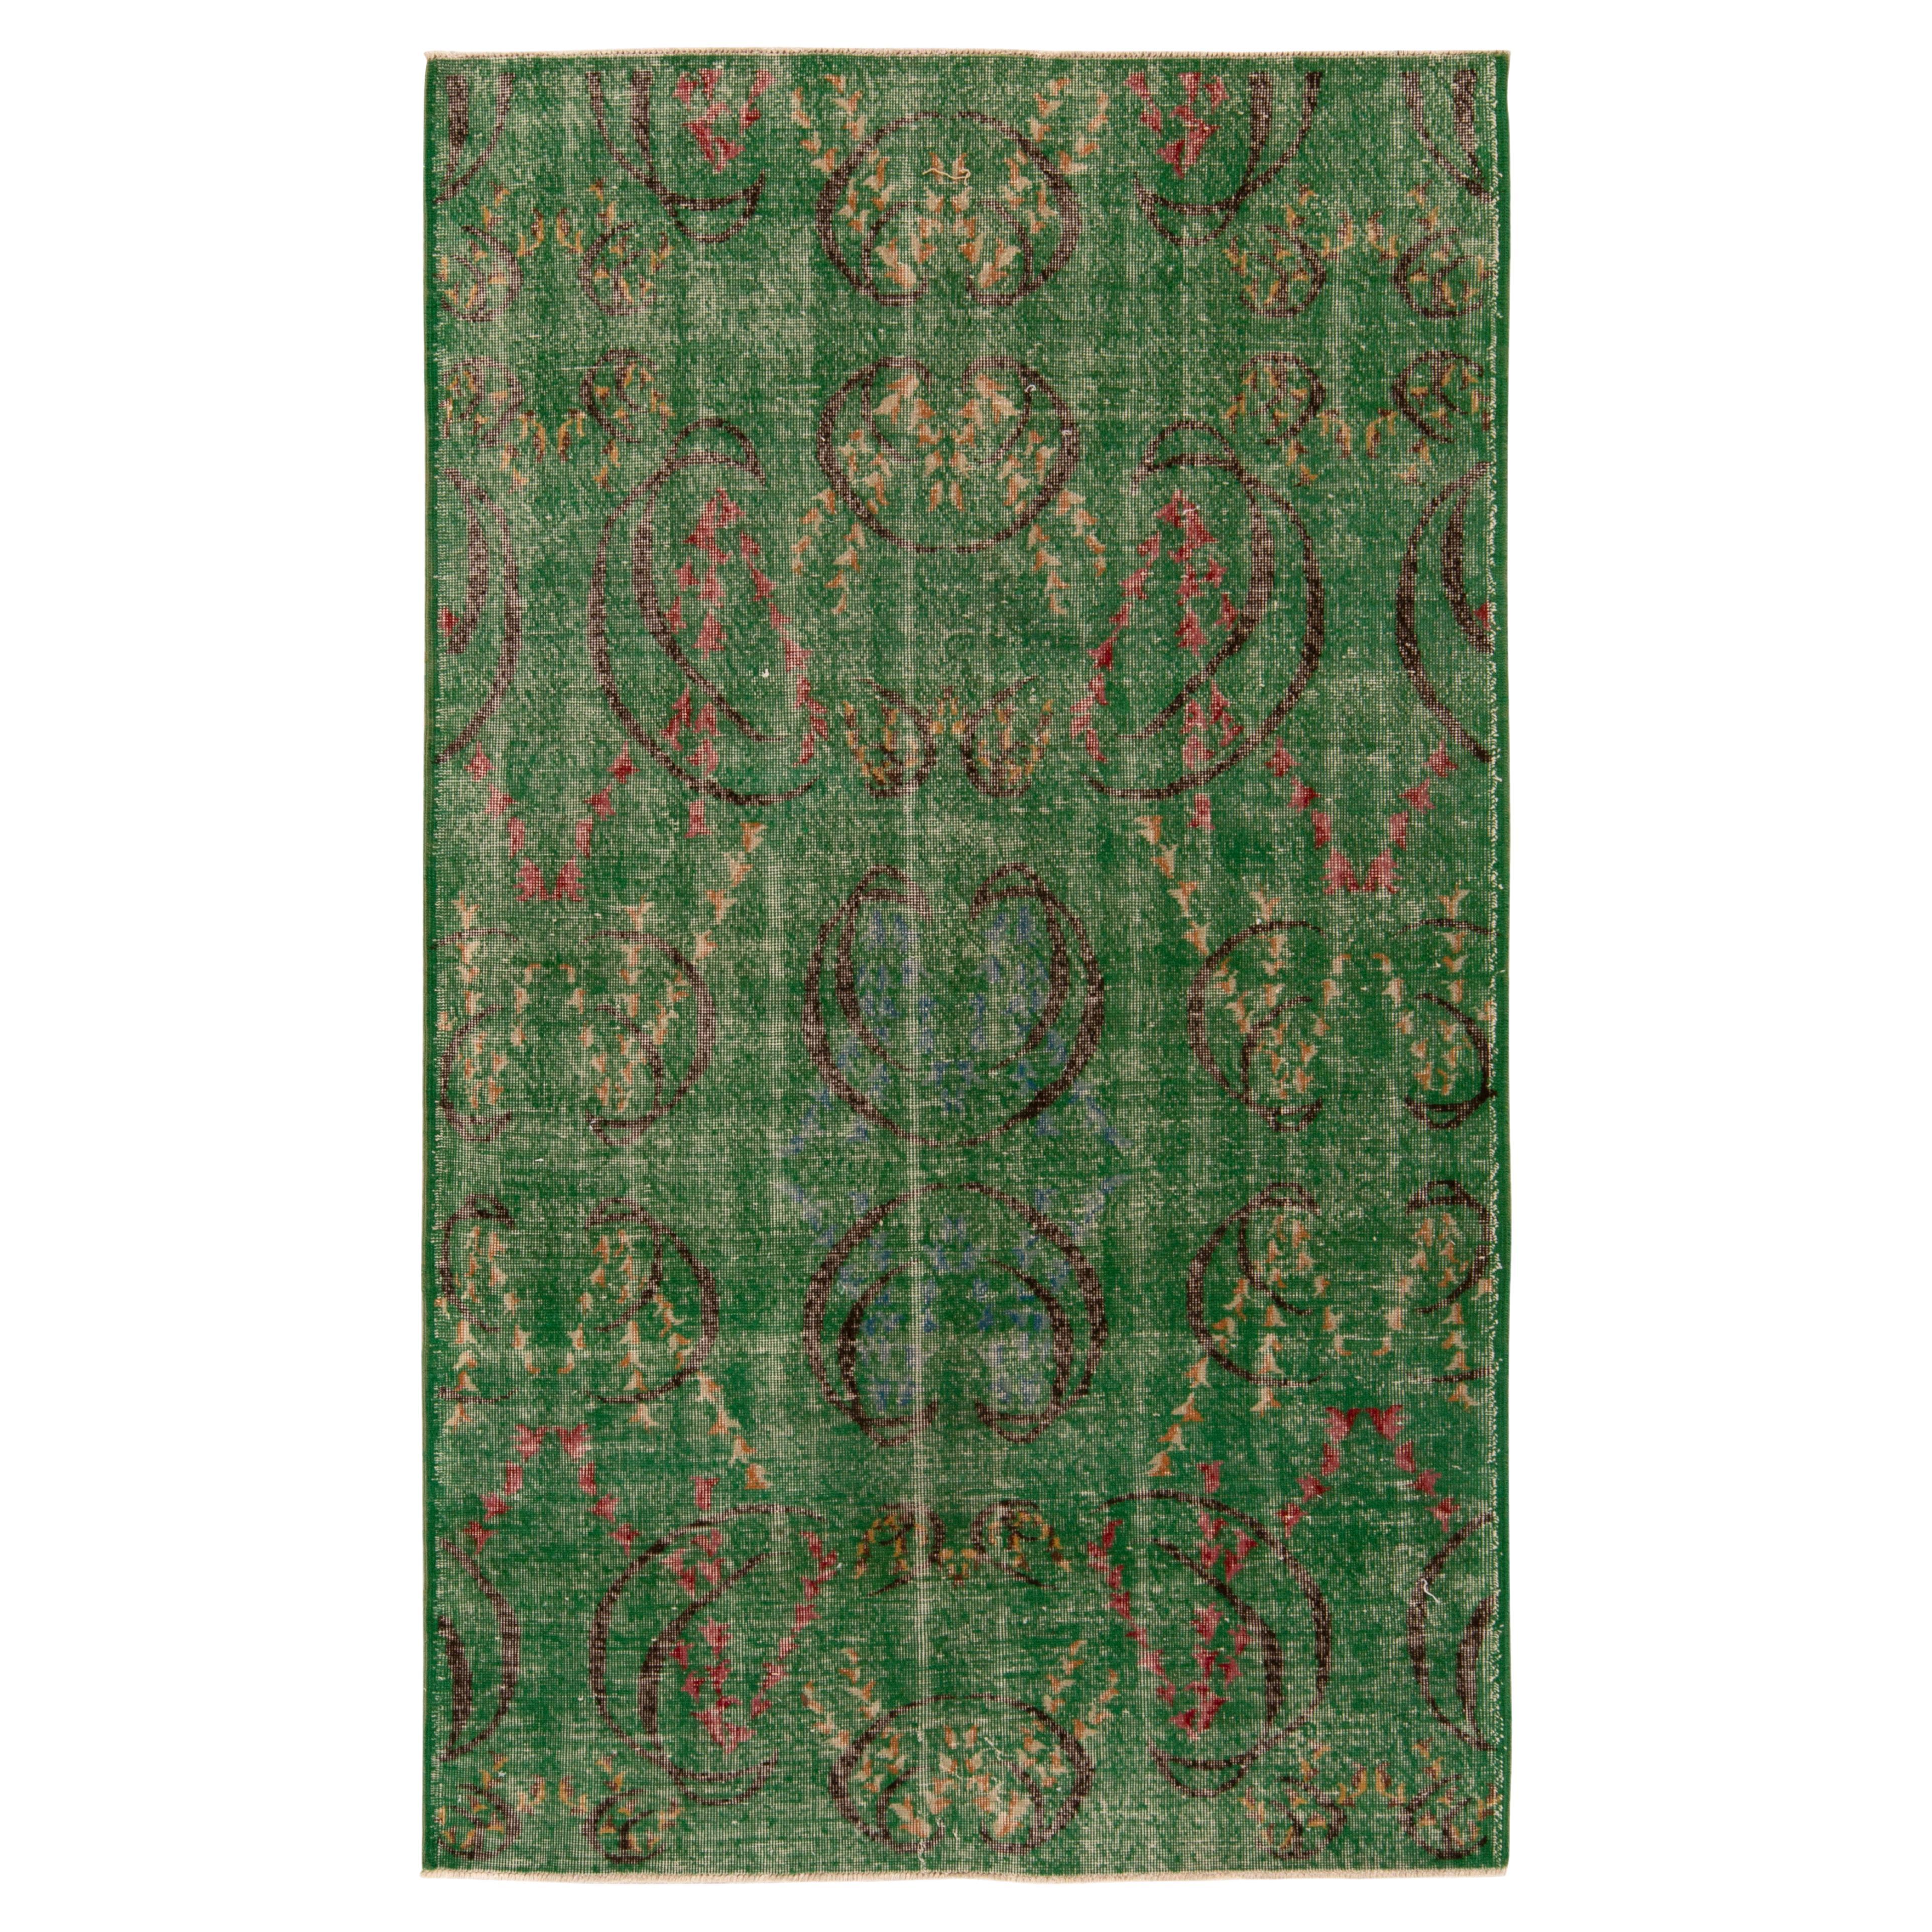 1960s Distressed Art Deco Rug in Green, Black, Geometric Patterns by Rug & KIlim For Sale